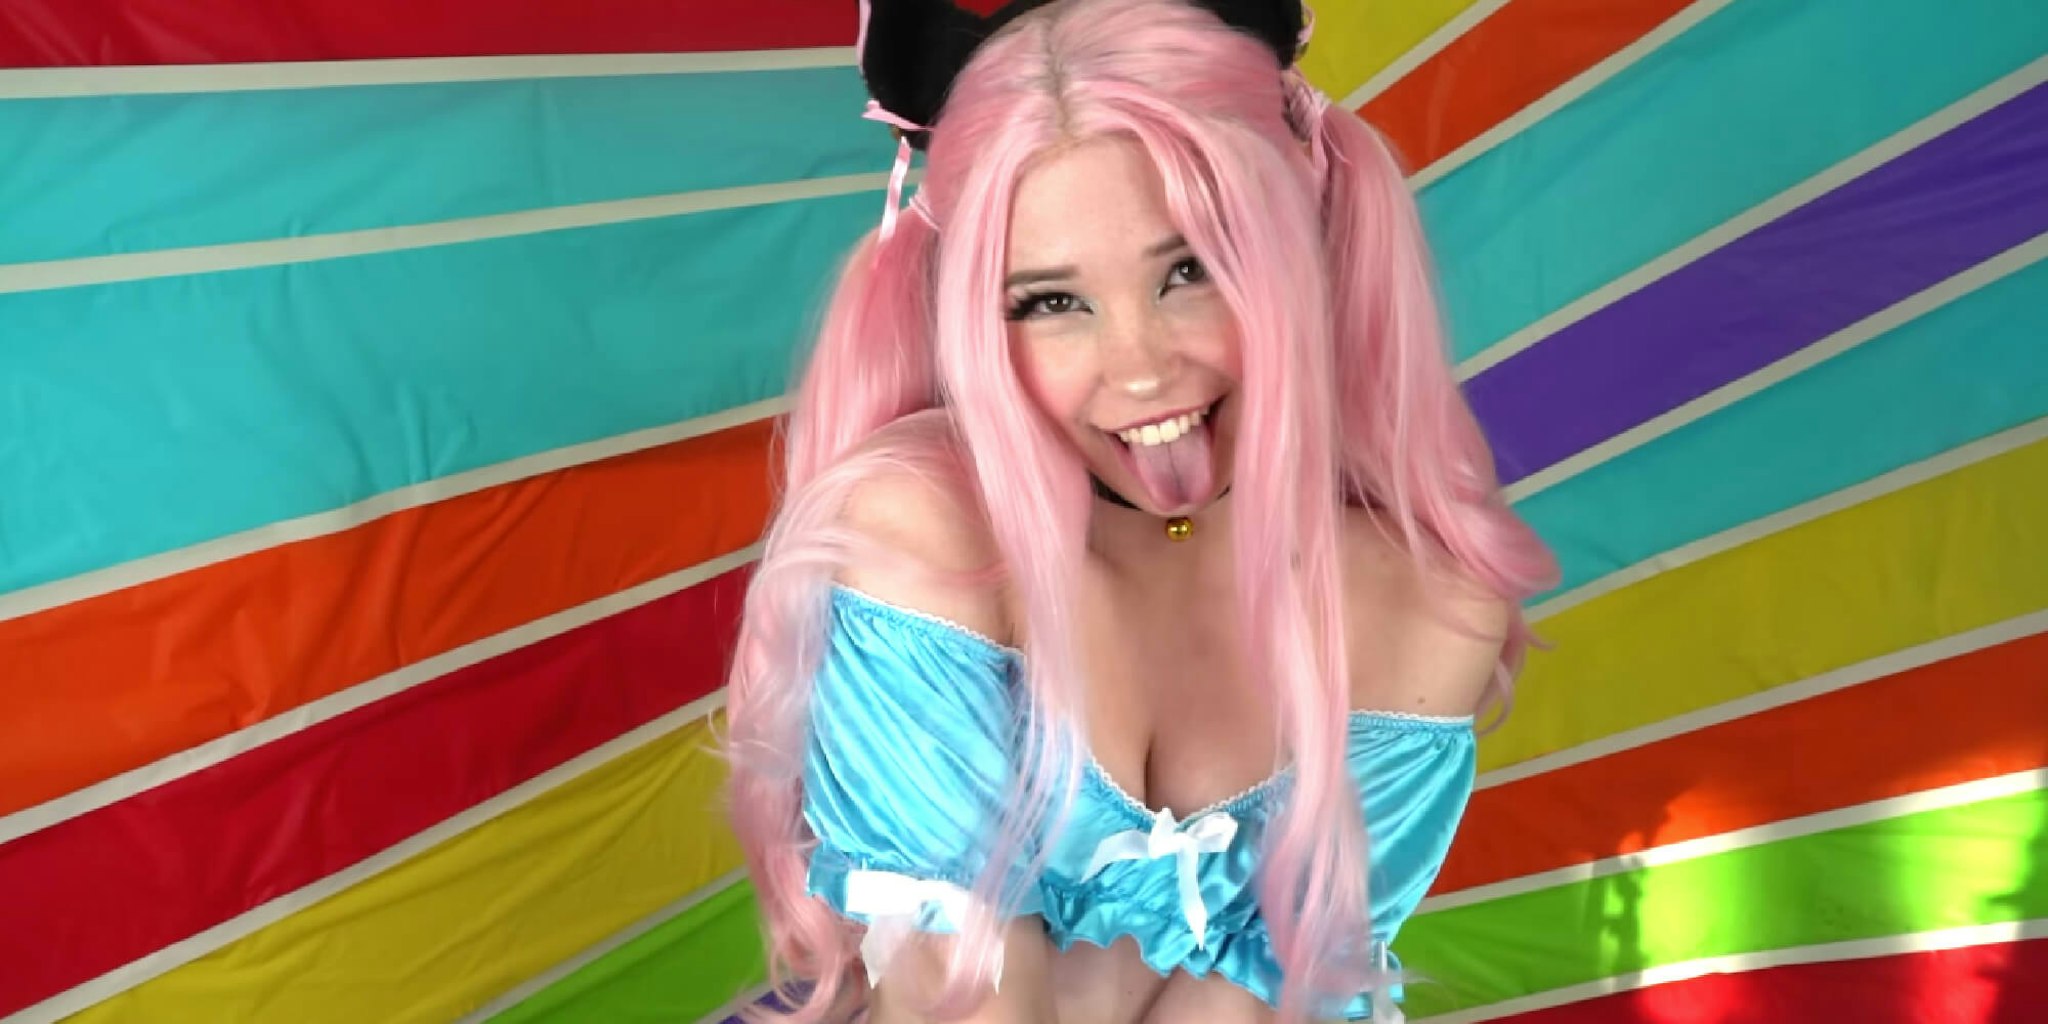 People are mad at Belle Delphine for her NSFW photoshoot posted on Twitter.